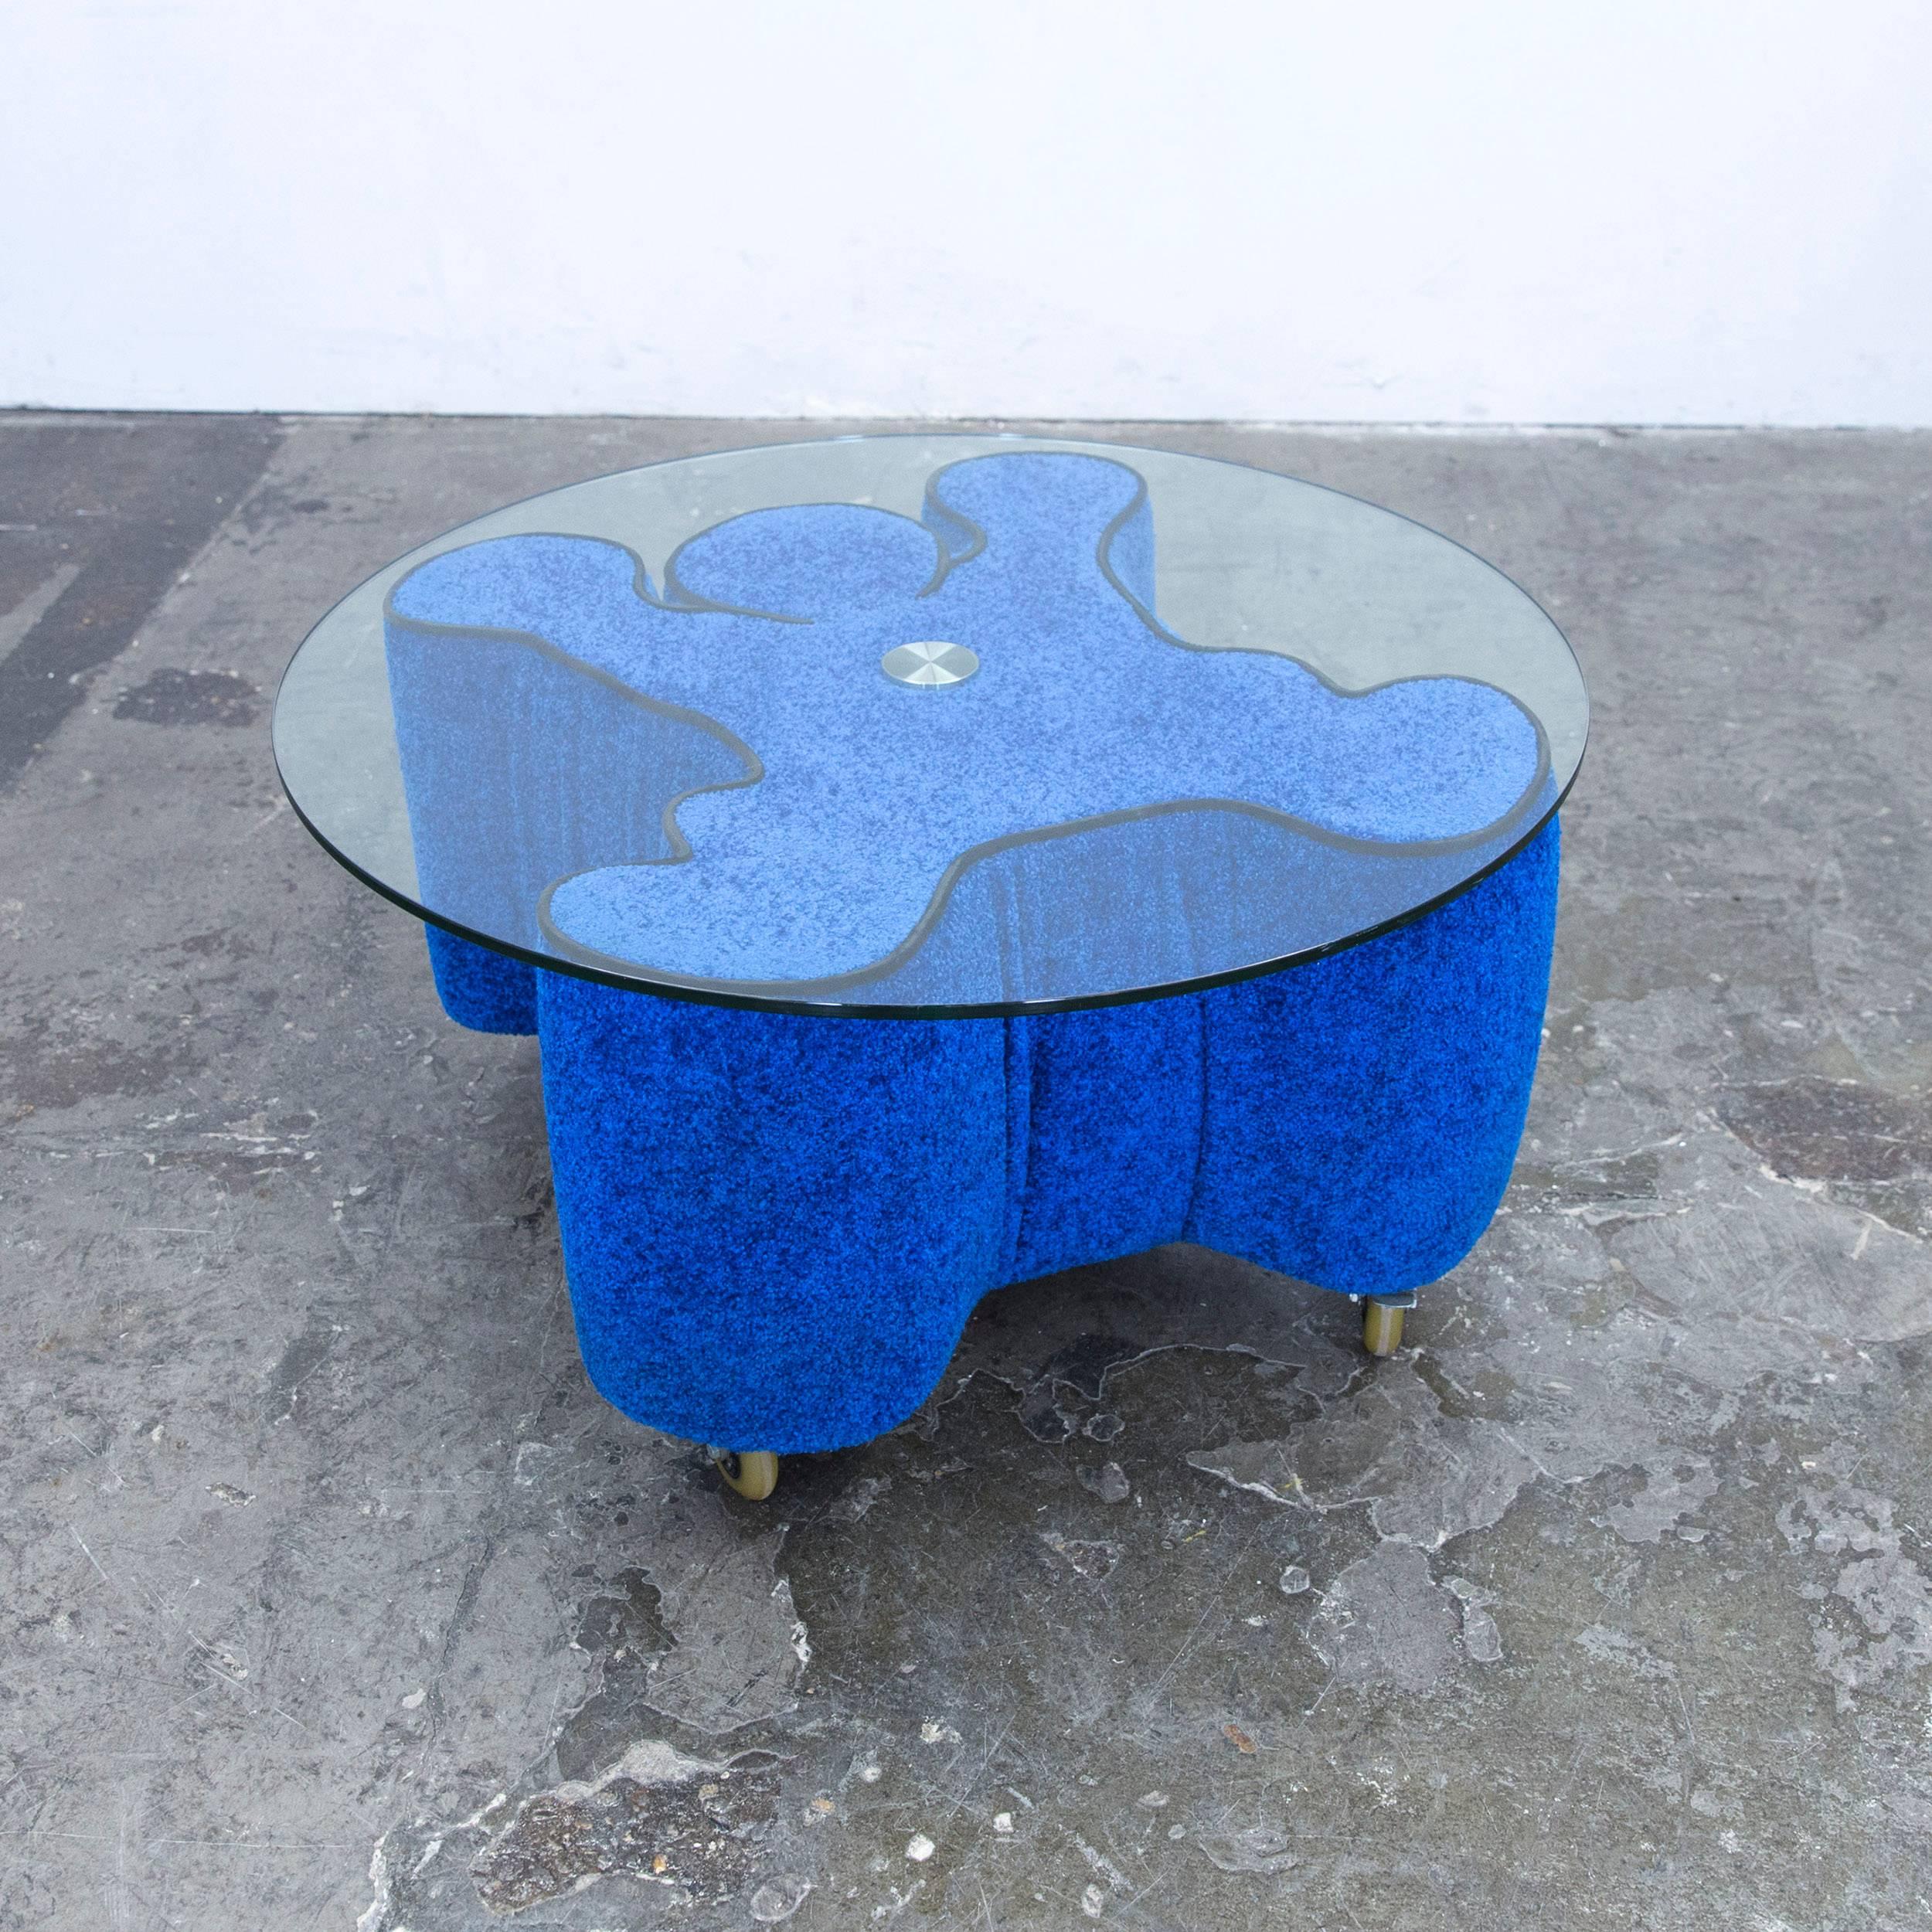 Blue colored original Bretz Keith Haring designer sofa table t in a modern design, made for pure comfort and style.